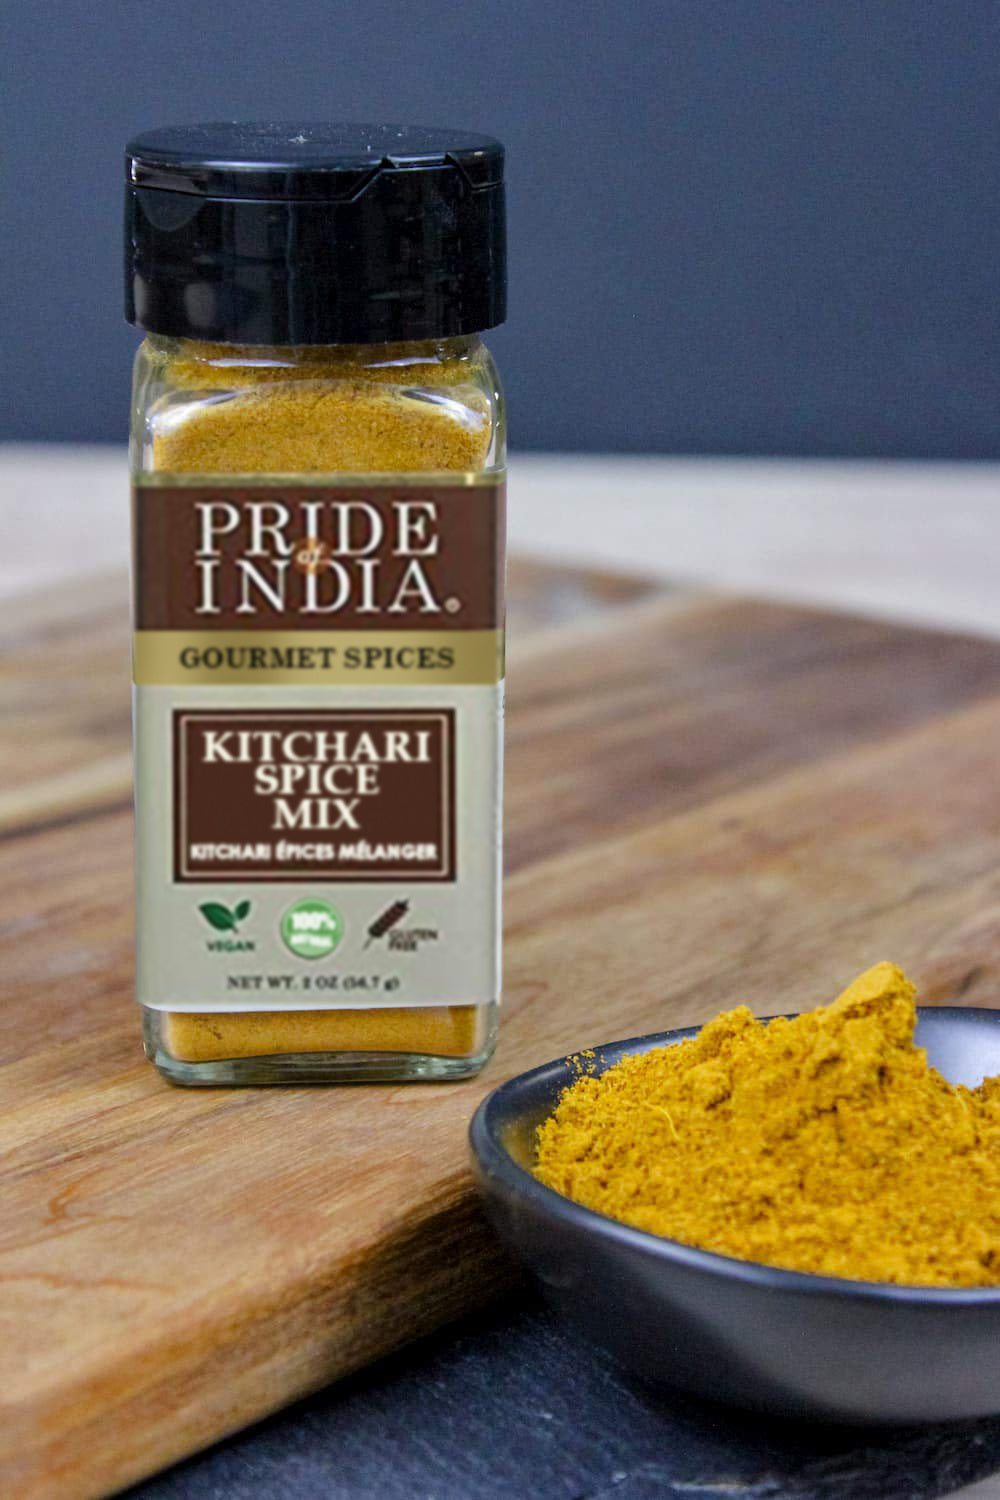 Pride of India - Kitchari Spice Seasoning – Authentic Indian Spices – 2 oz. Small Dual Sifter Bottle